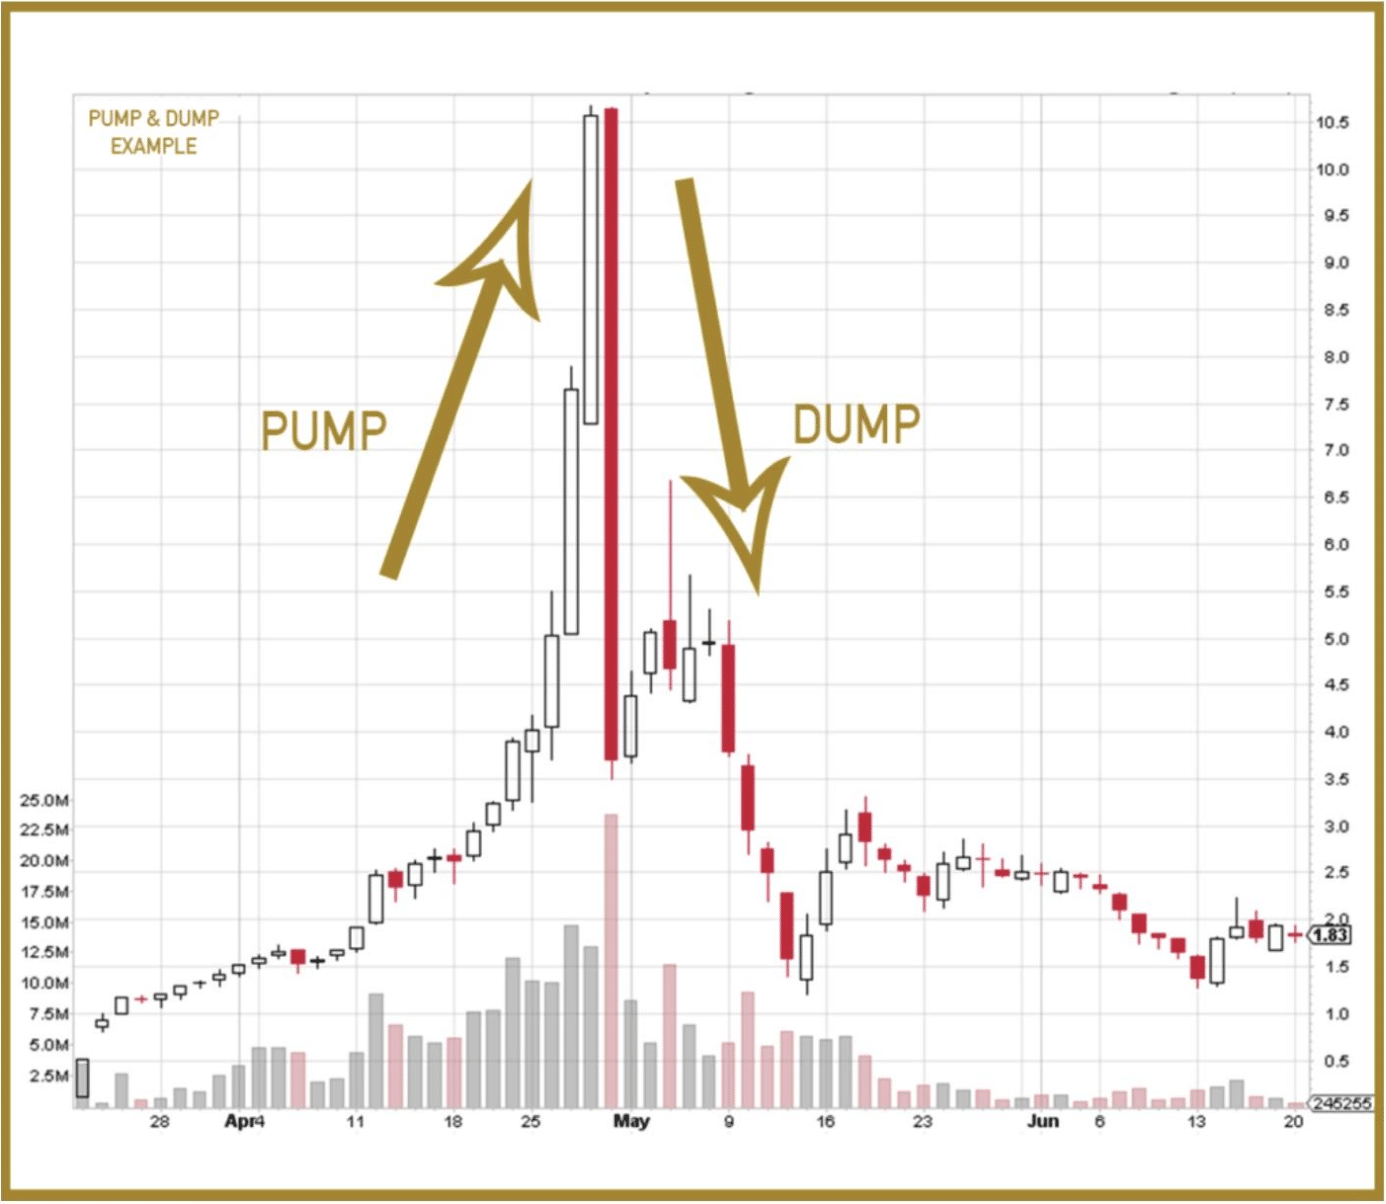 An example of a pump and dump crypto scheme.